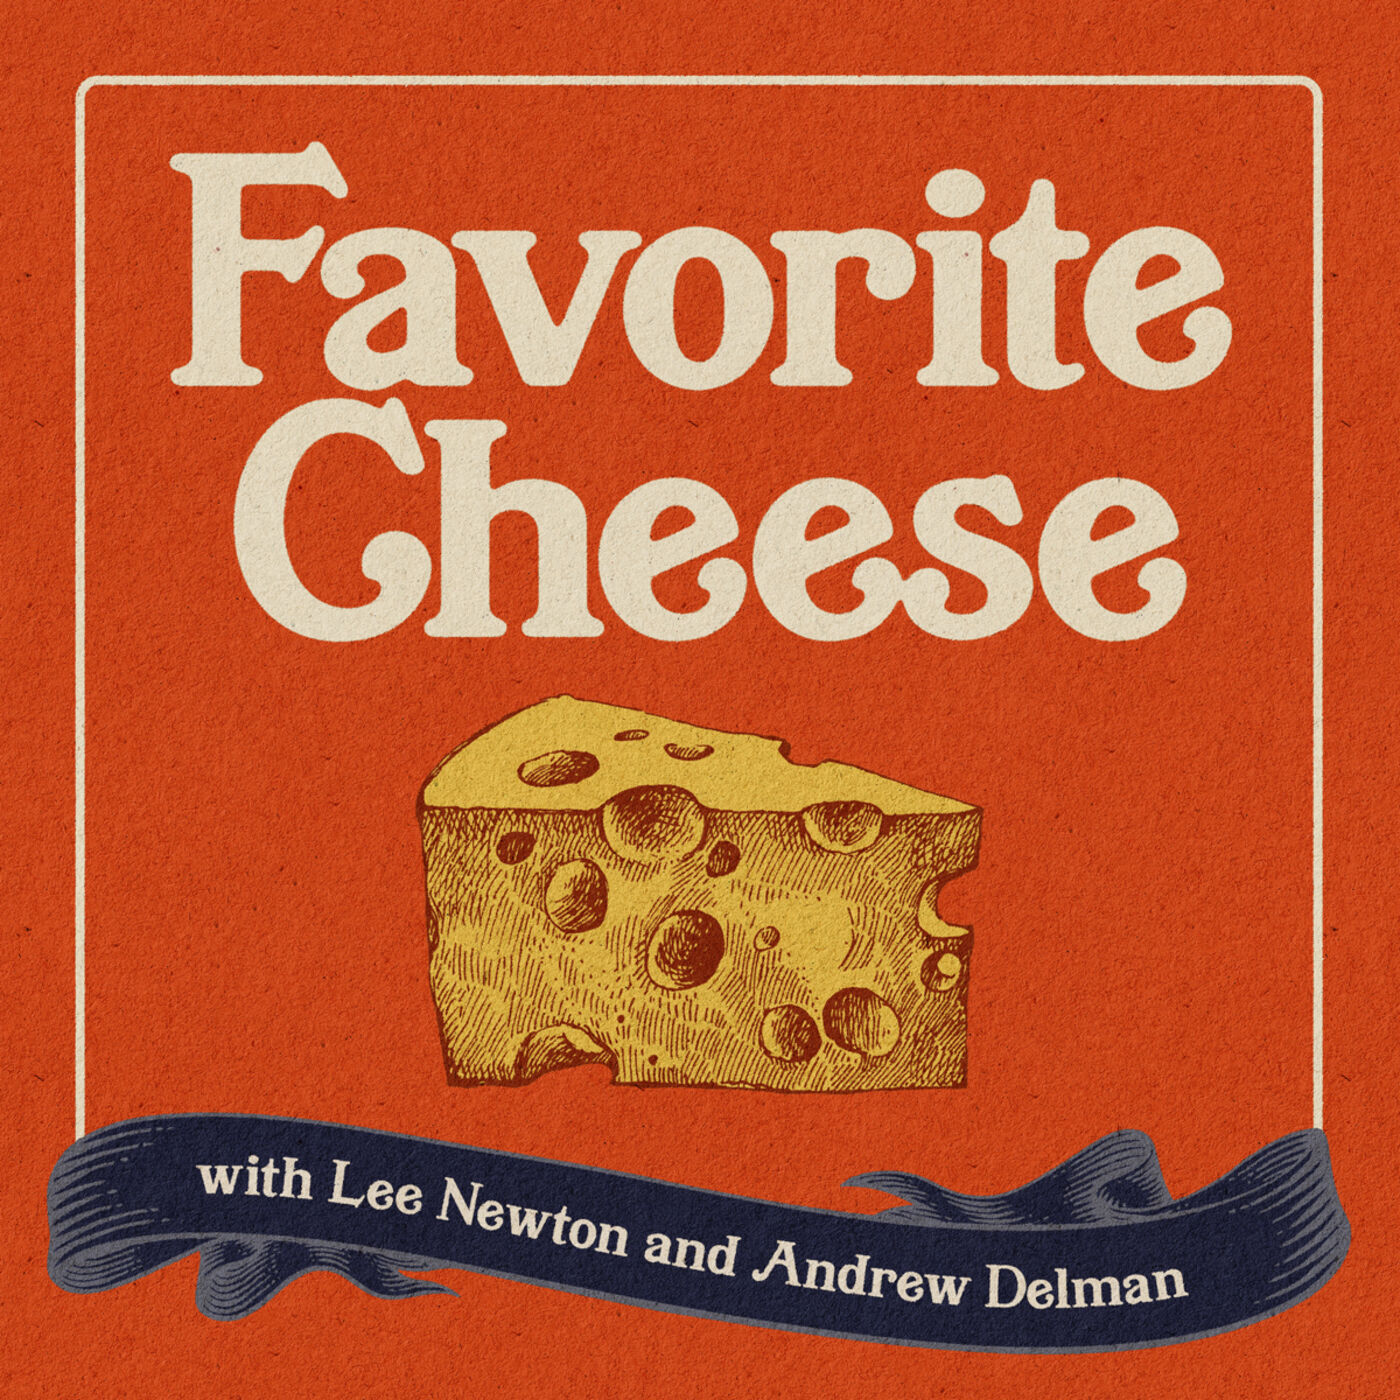 Favorite Cheese